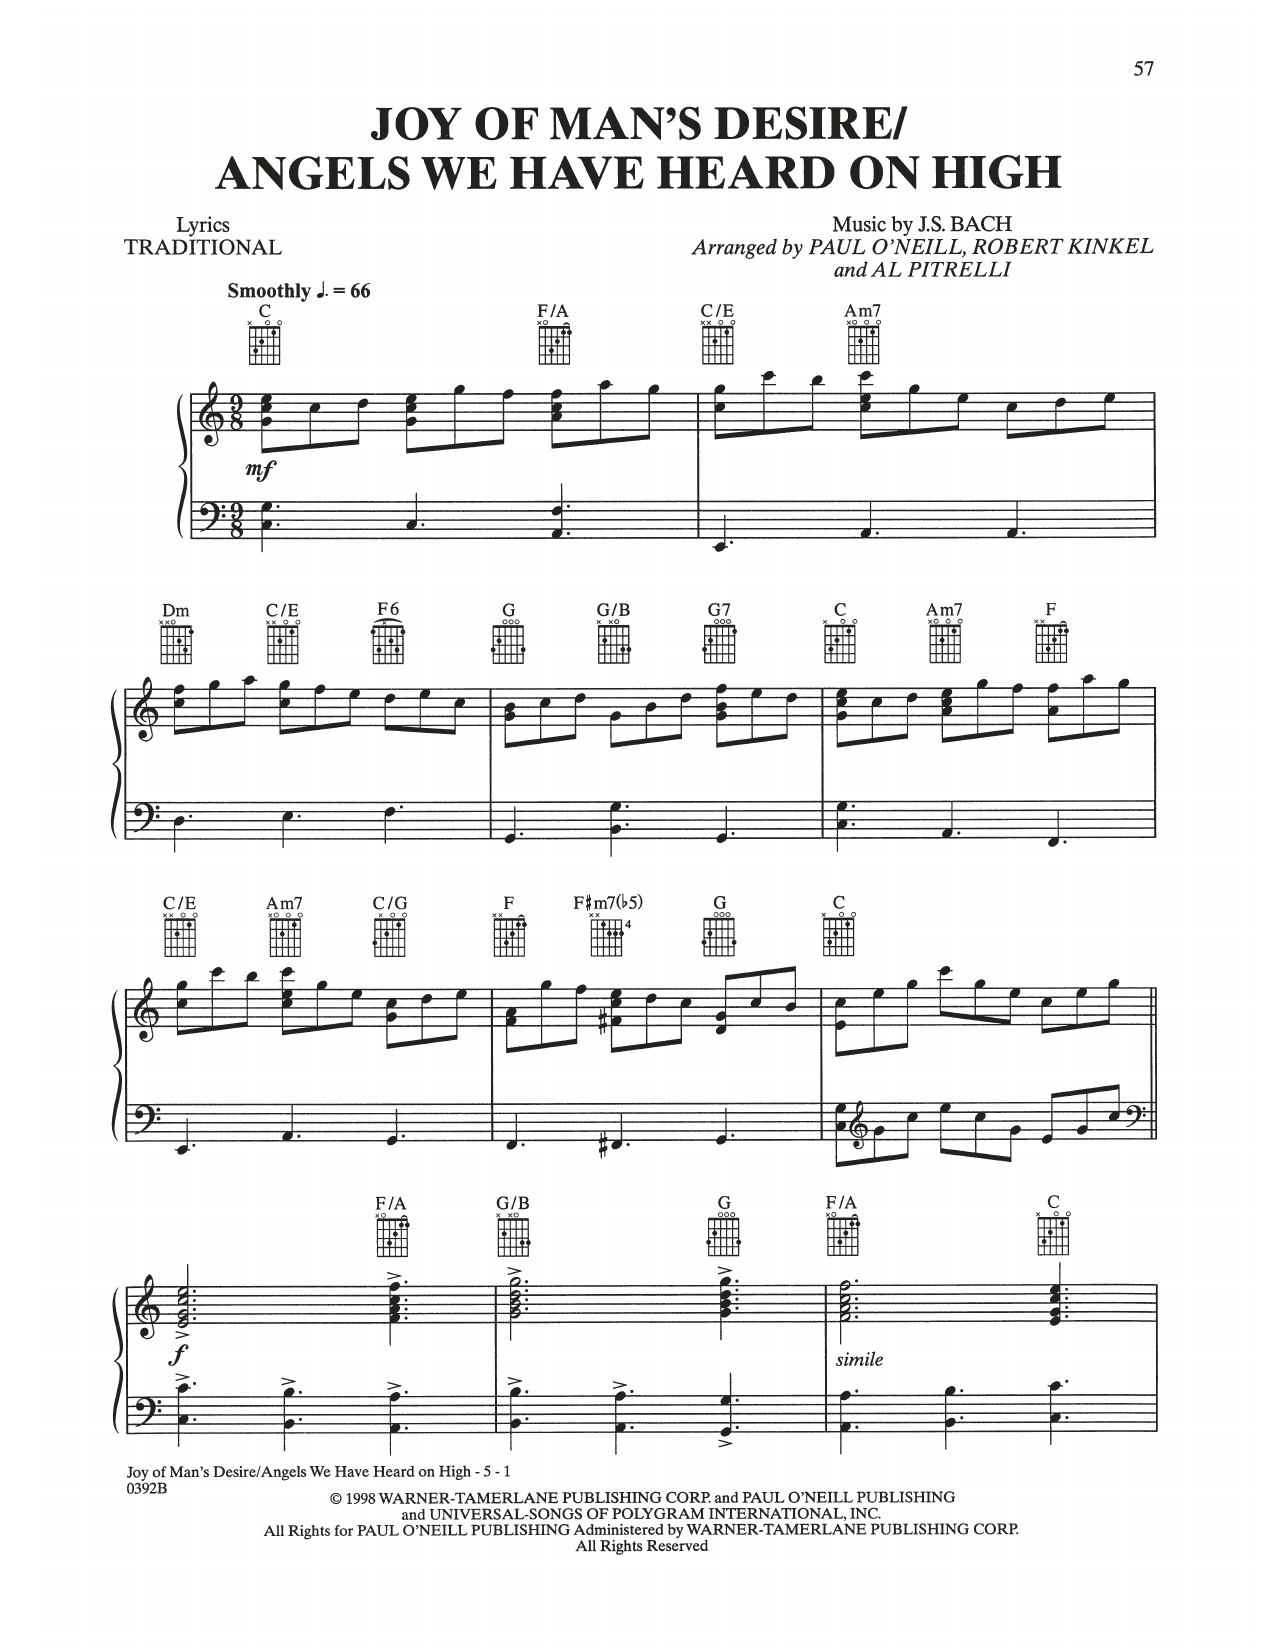 Download Trans-Siberian Orchestra Joy Of Man's Desire / Angels We Have He Sheet Music